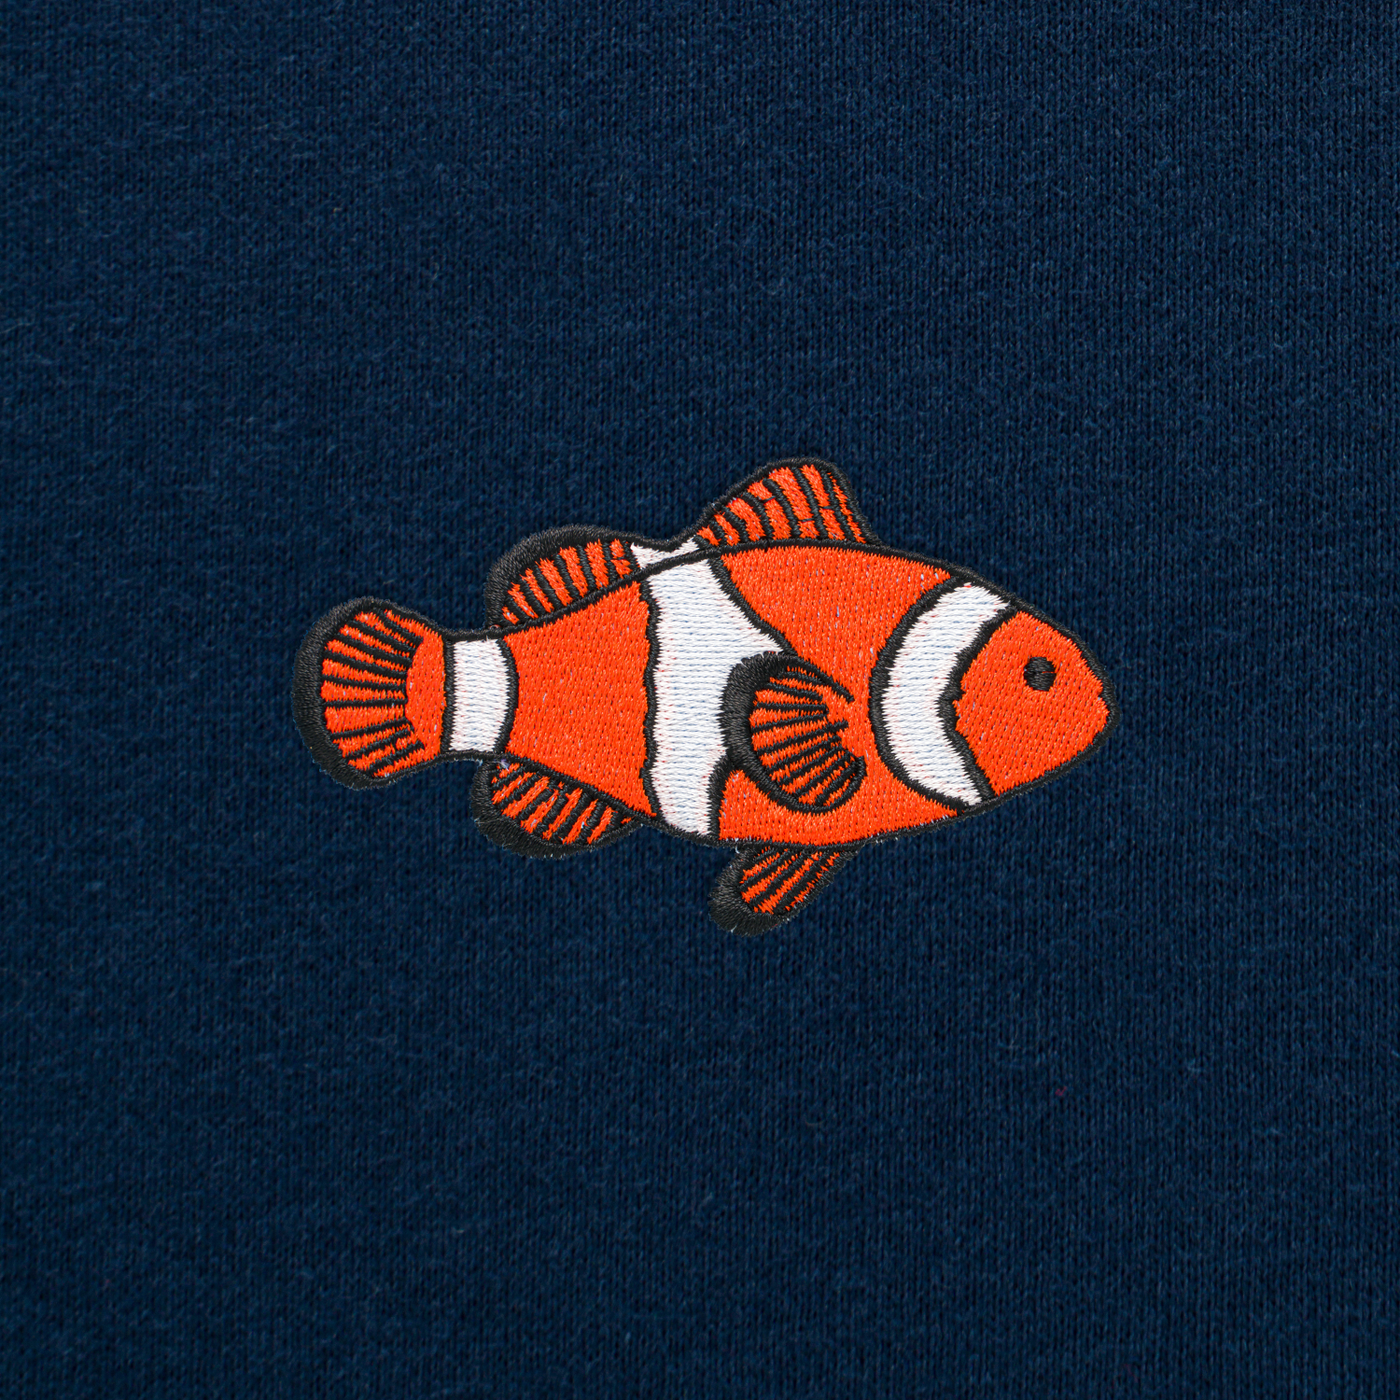 Bobby's Planet Men's Embroidered Clownfish Long Sleeve Shirt from Seven Seas Fish Animals Collection in Navy Color#color_navy